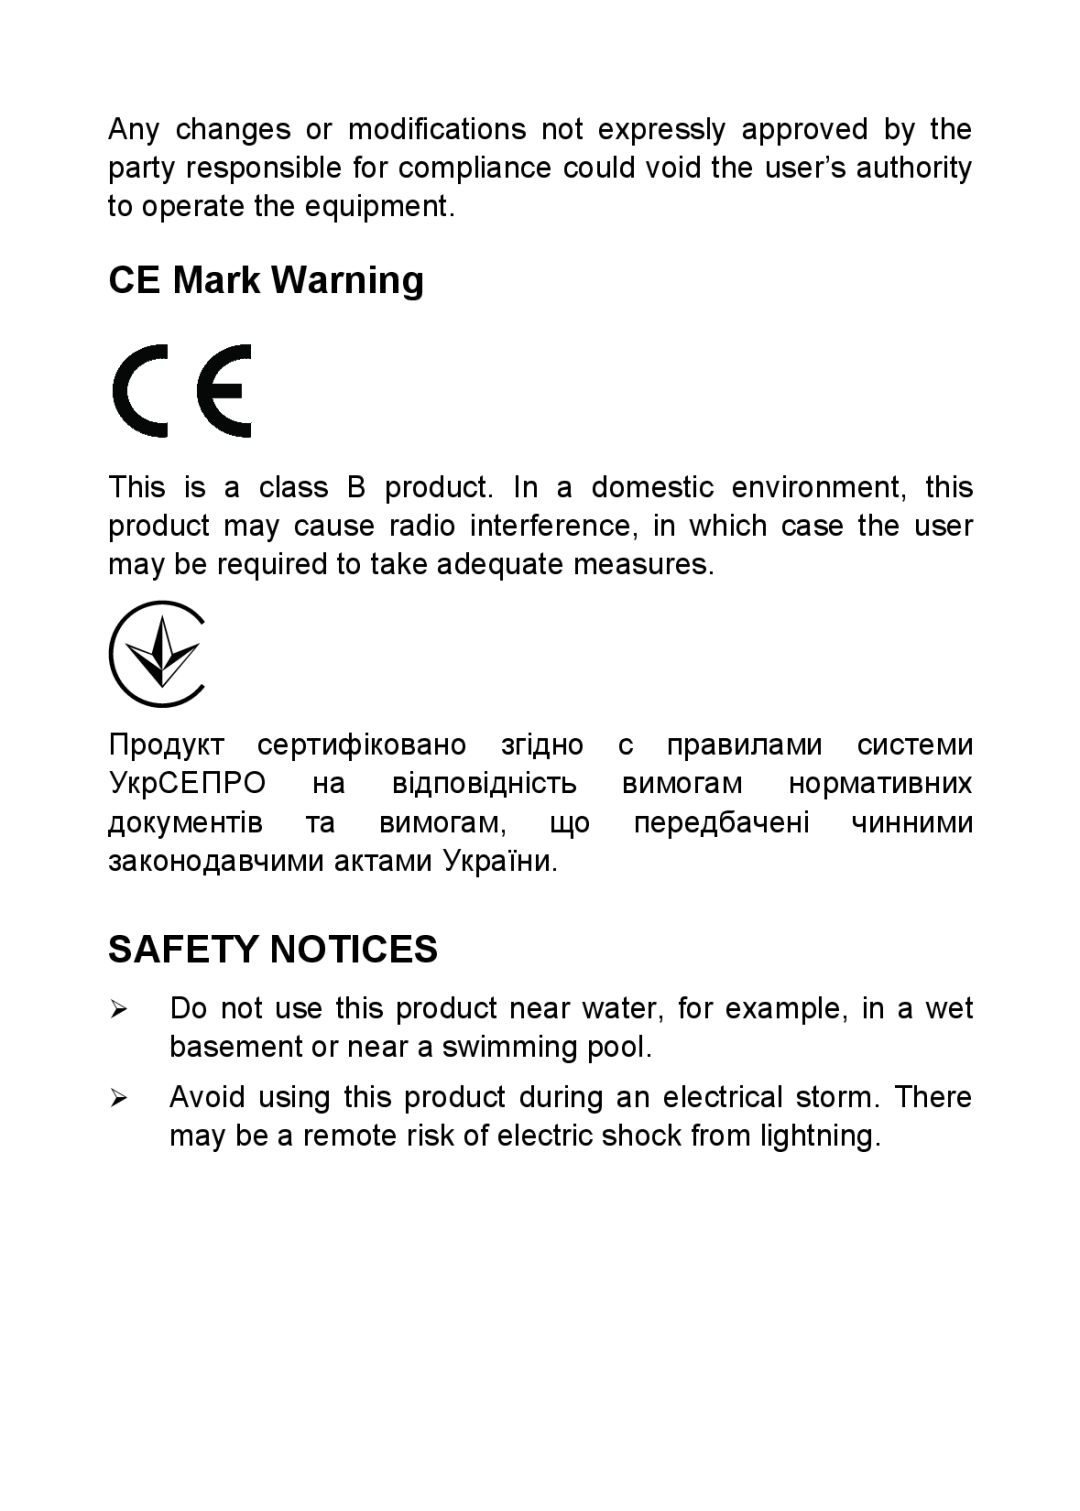 TP-Link TL-POE10R manual CE Mark Warning, Safety Notices 